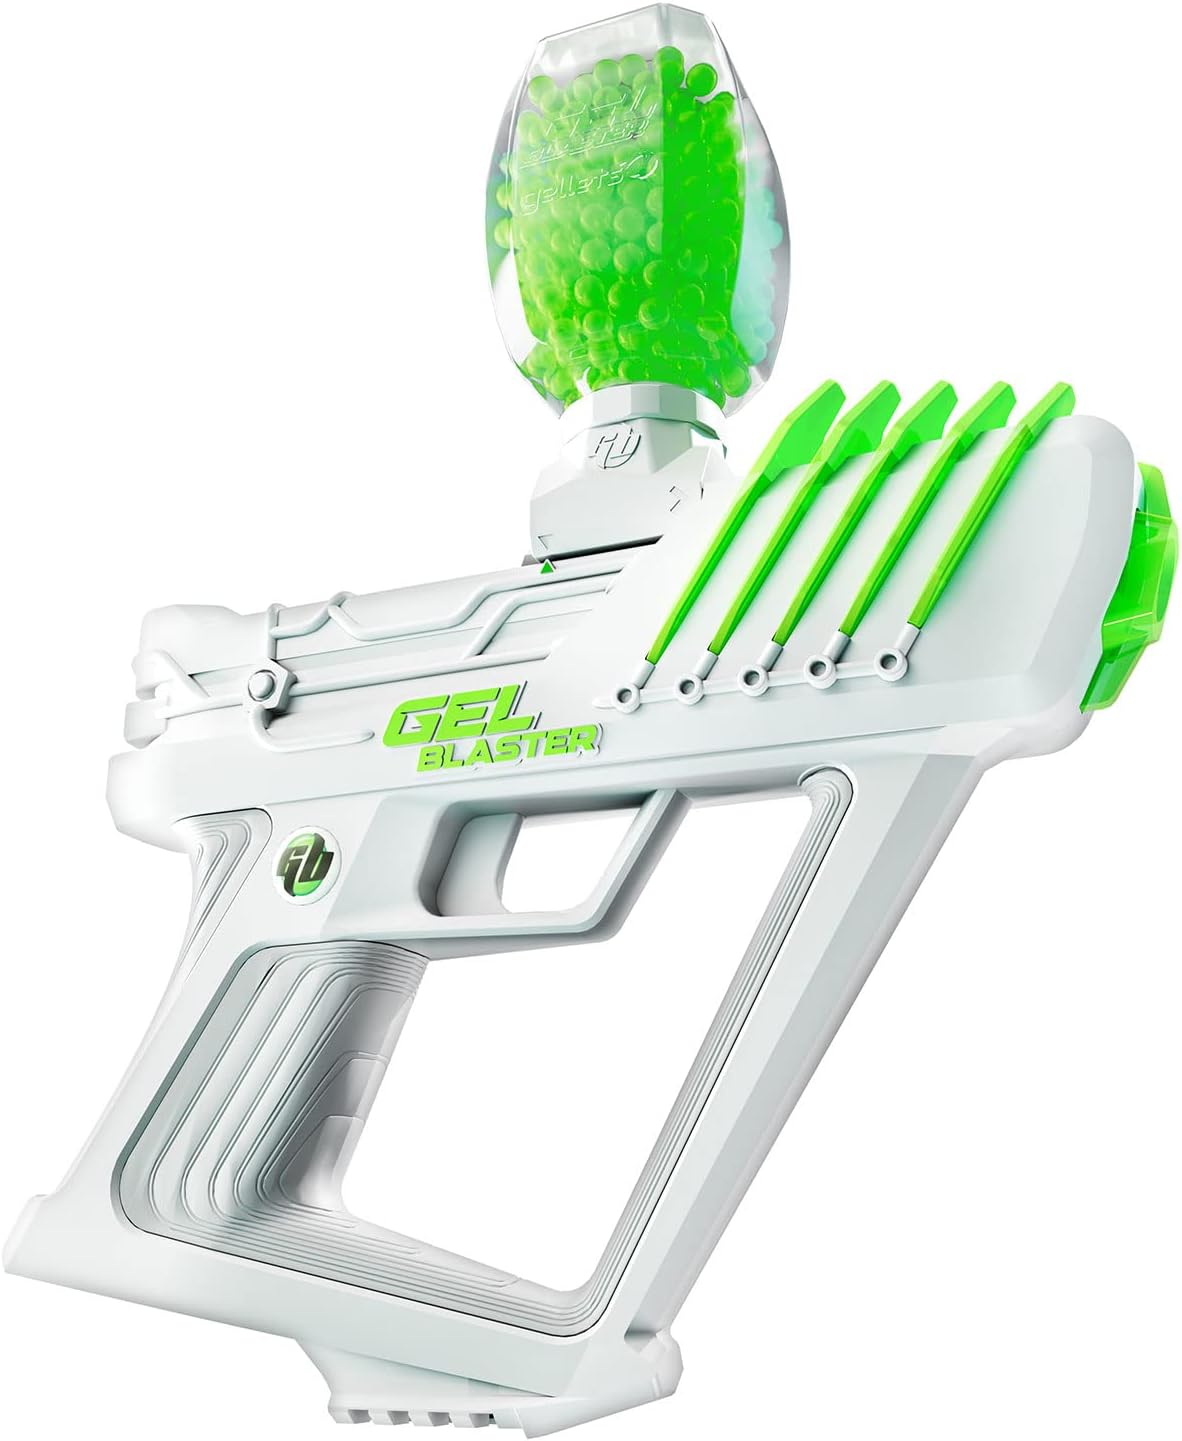 A white and green water gun with a green ball, also known as an Orbeez gun. A white and green orbeez gun with a green ball